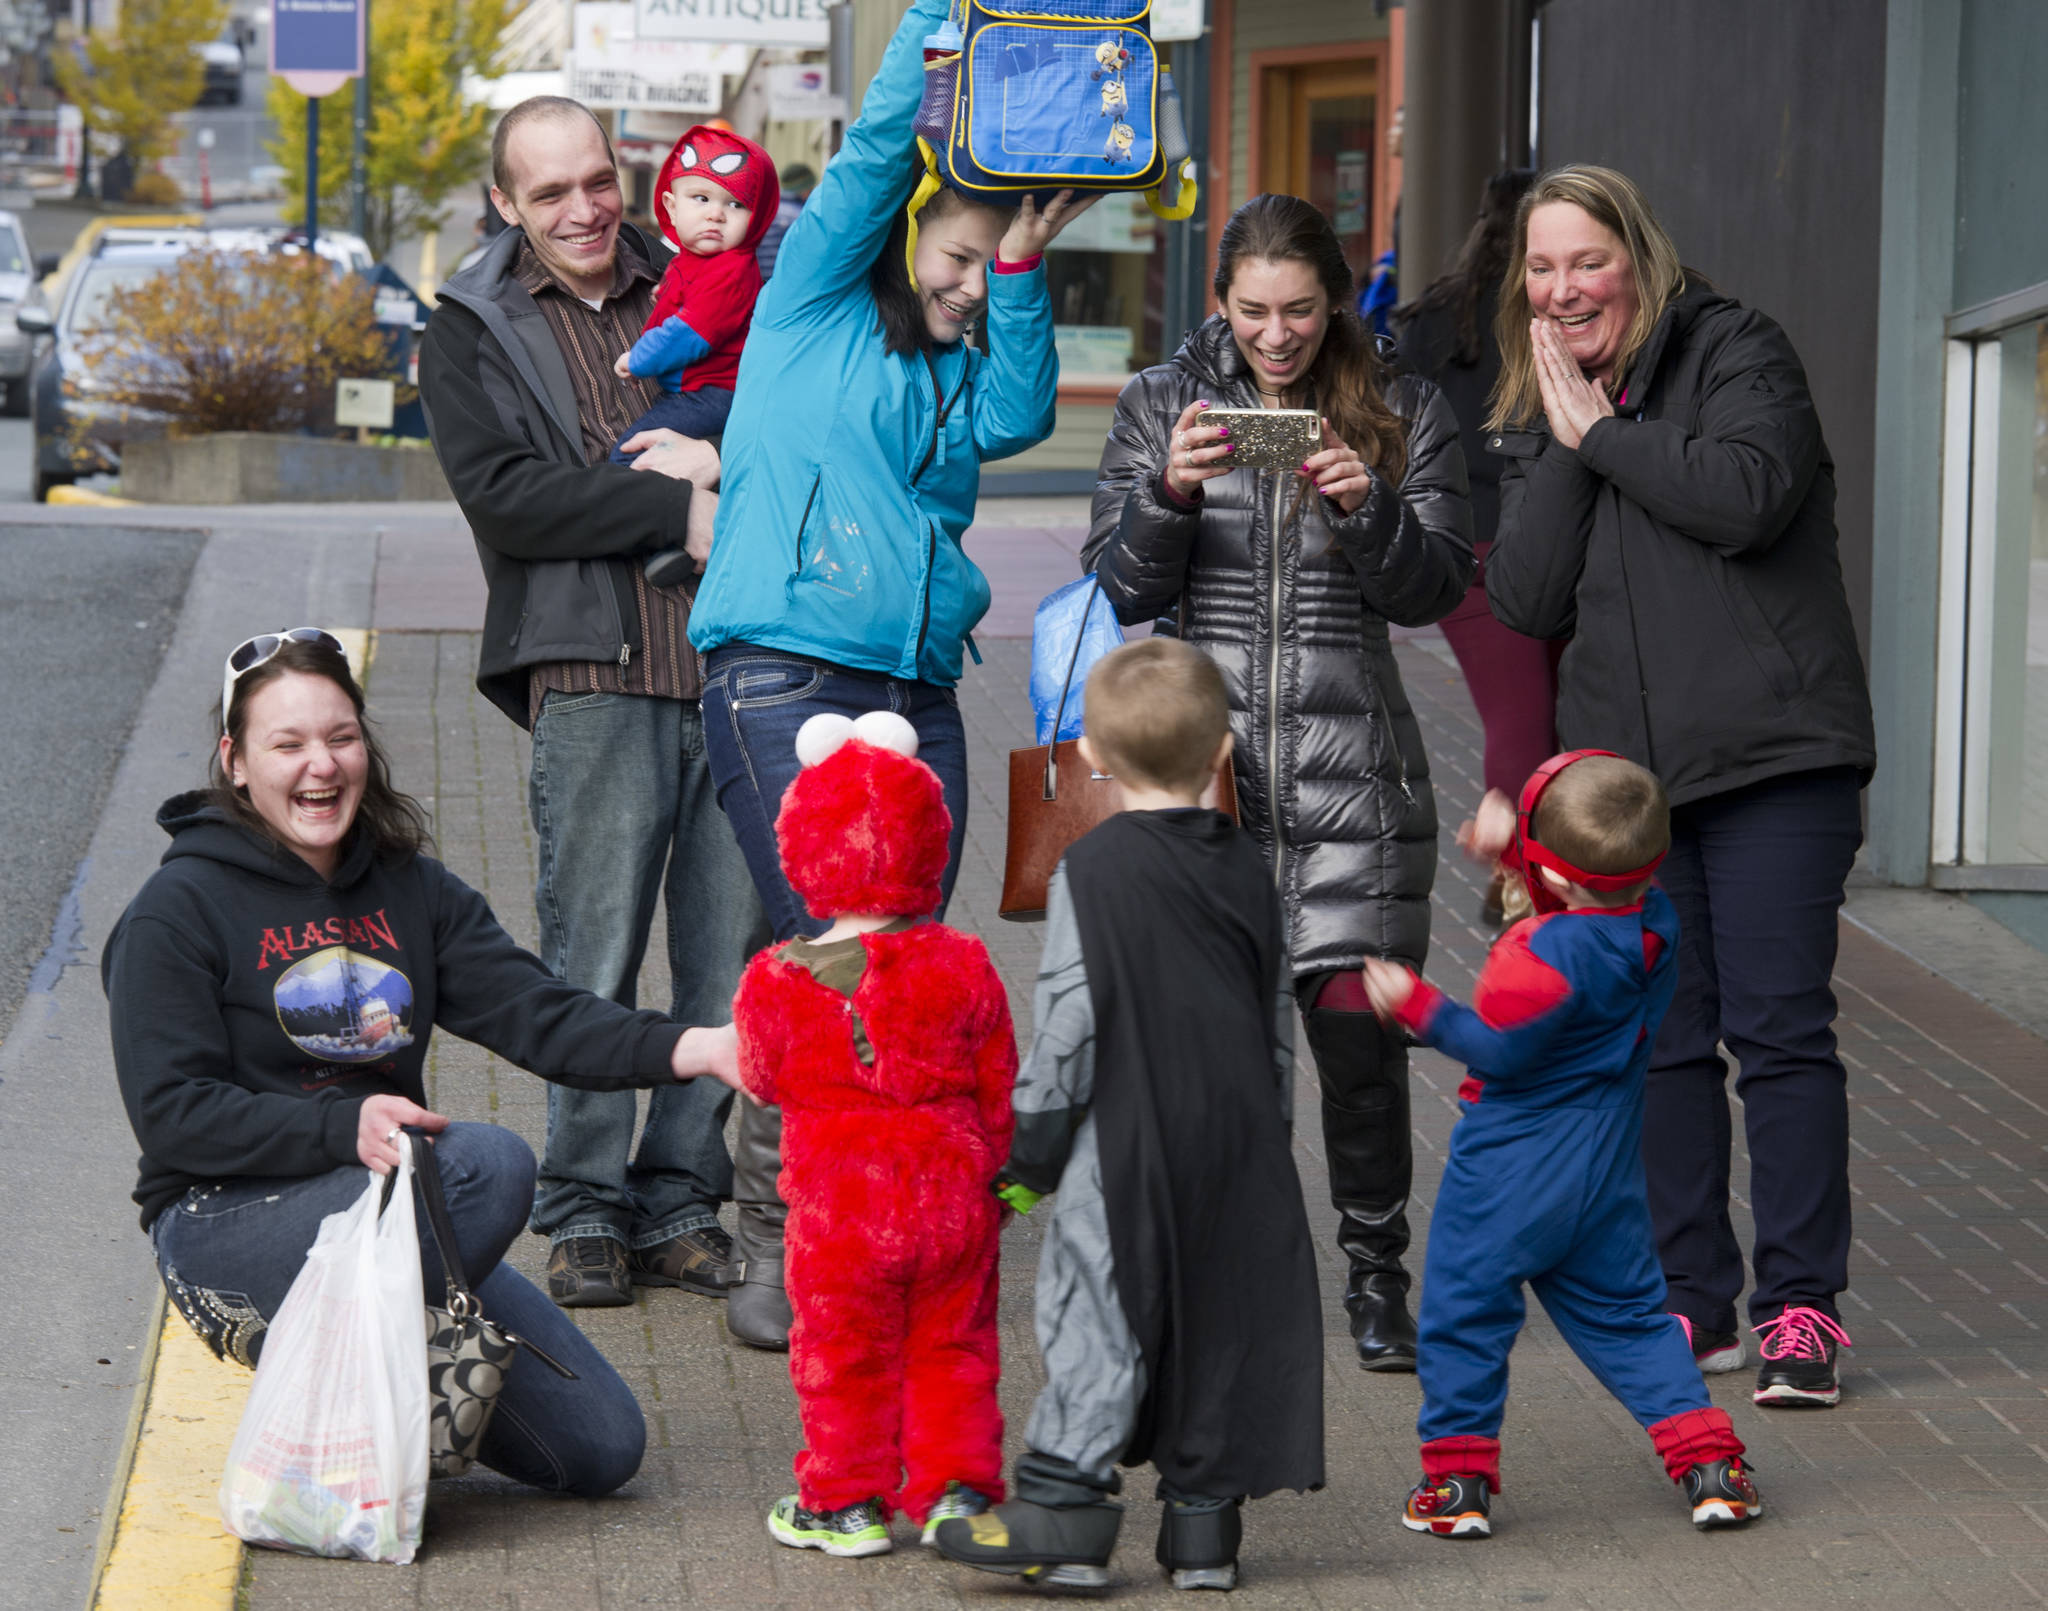 Parents, grandparents and friends have fun photographing their young ones on Seward Street for Halloween 2016. More than 50 businesses downtown welcomed trick-or-treaters last year. (Michael Penn | Juneau Empire)